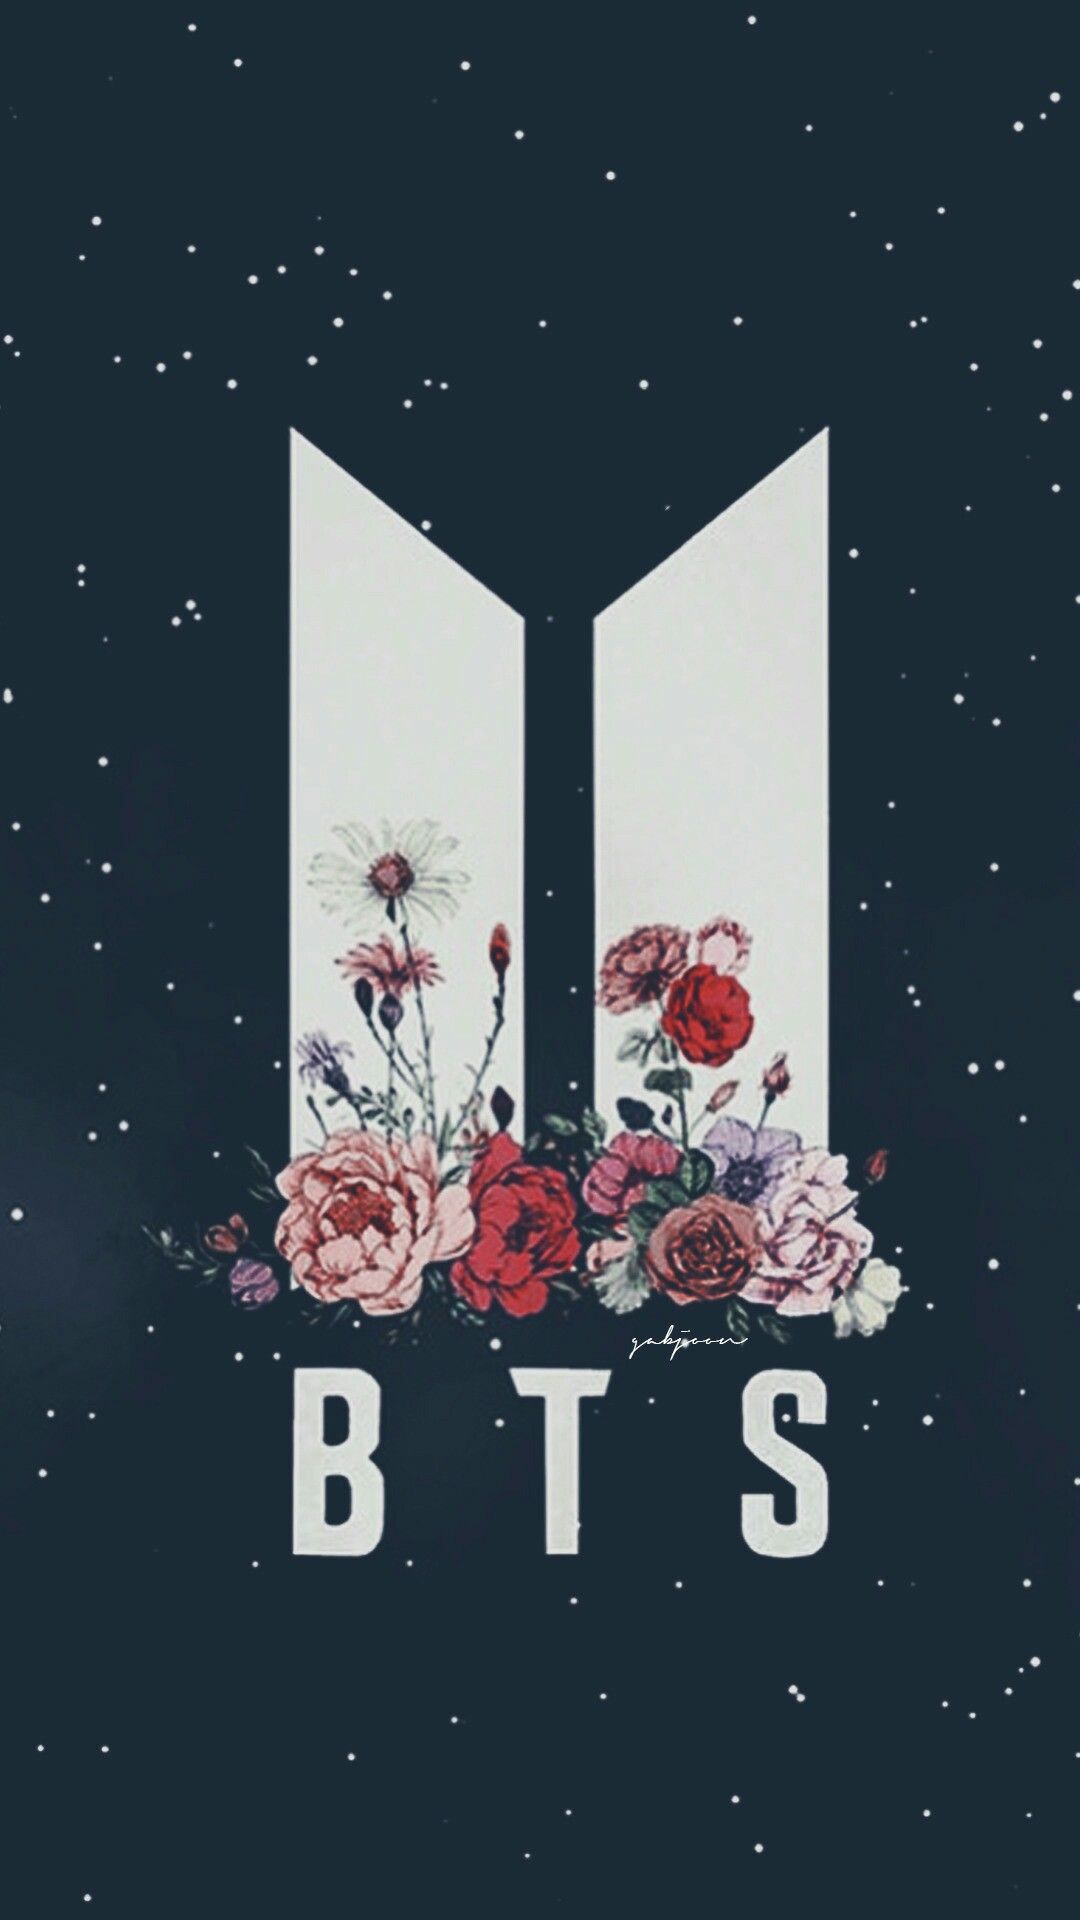 Bts Logo Wallpapers - Bts Logo With Flowers - HD Wallpaper 